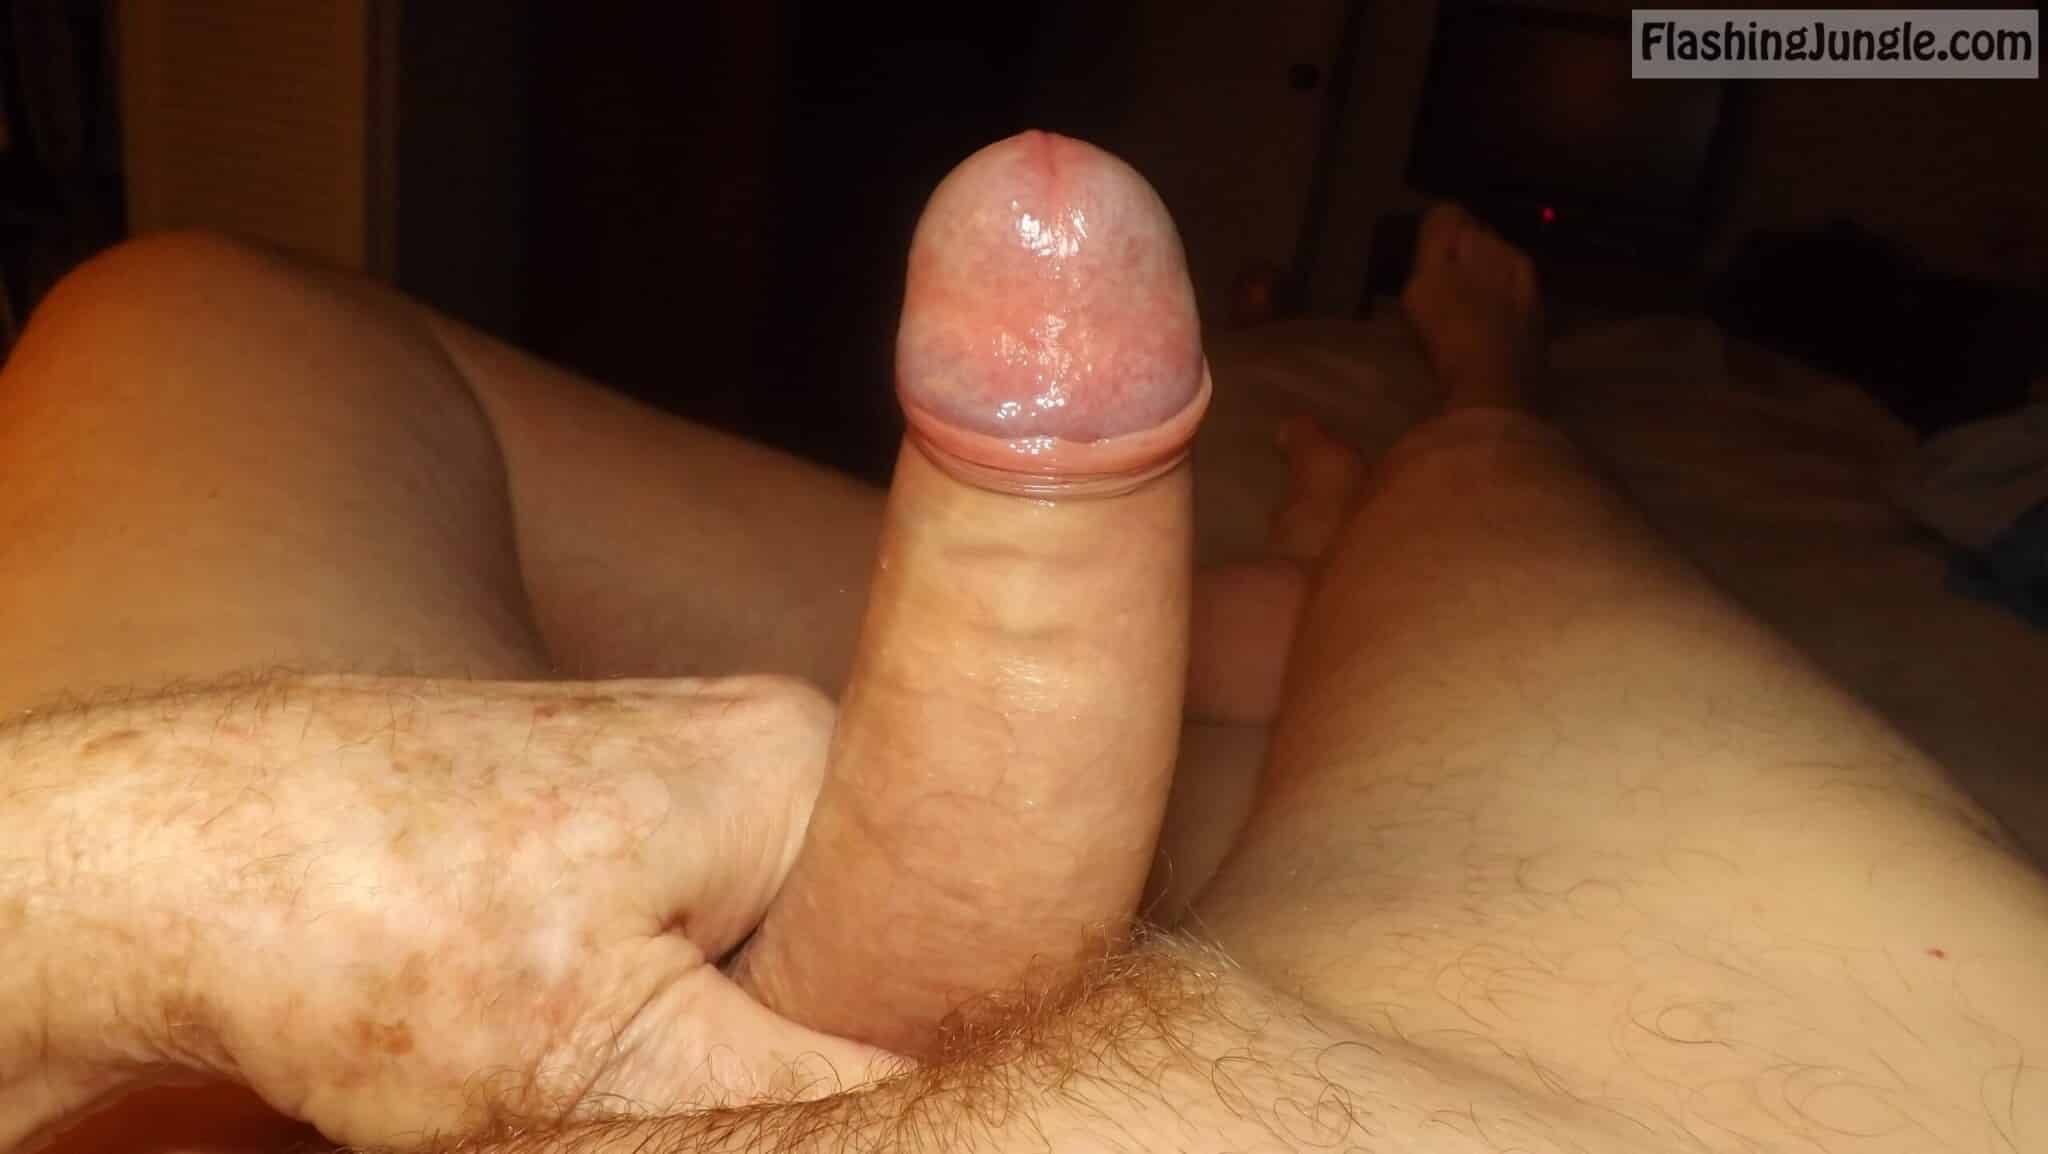 dick flash tumbir pics - Old Dick1 Old Dick ready to go, just looking for pussy. - Dick Flash Pics